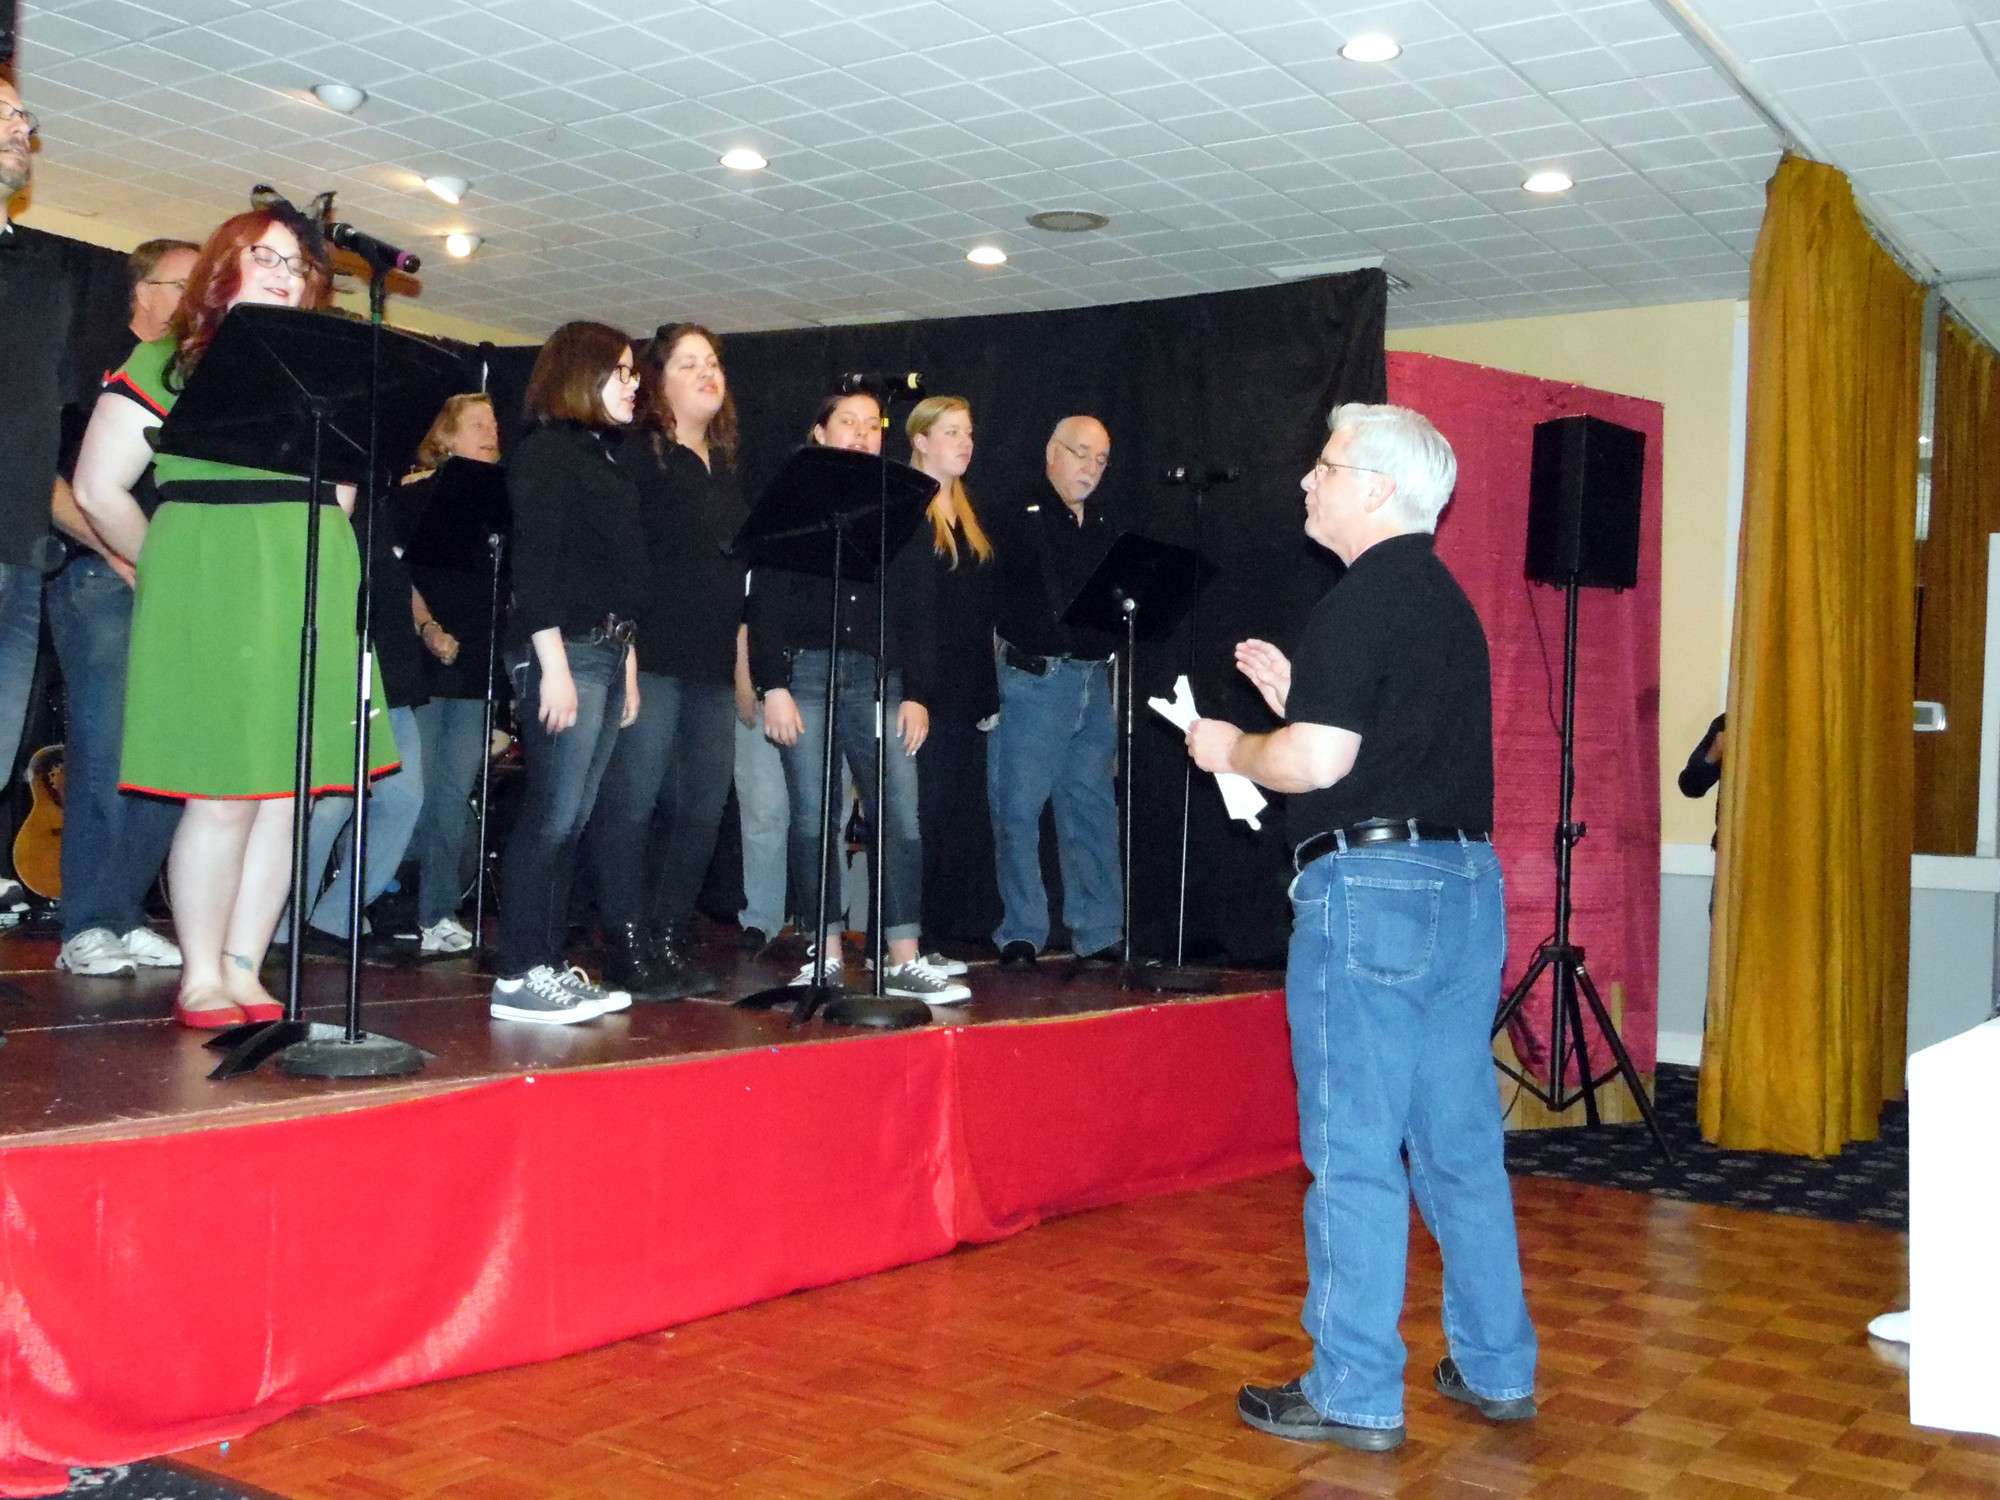 Choral Director Don Kolman led the singers in some lively tunes.